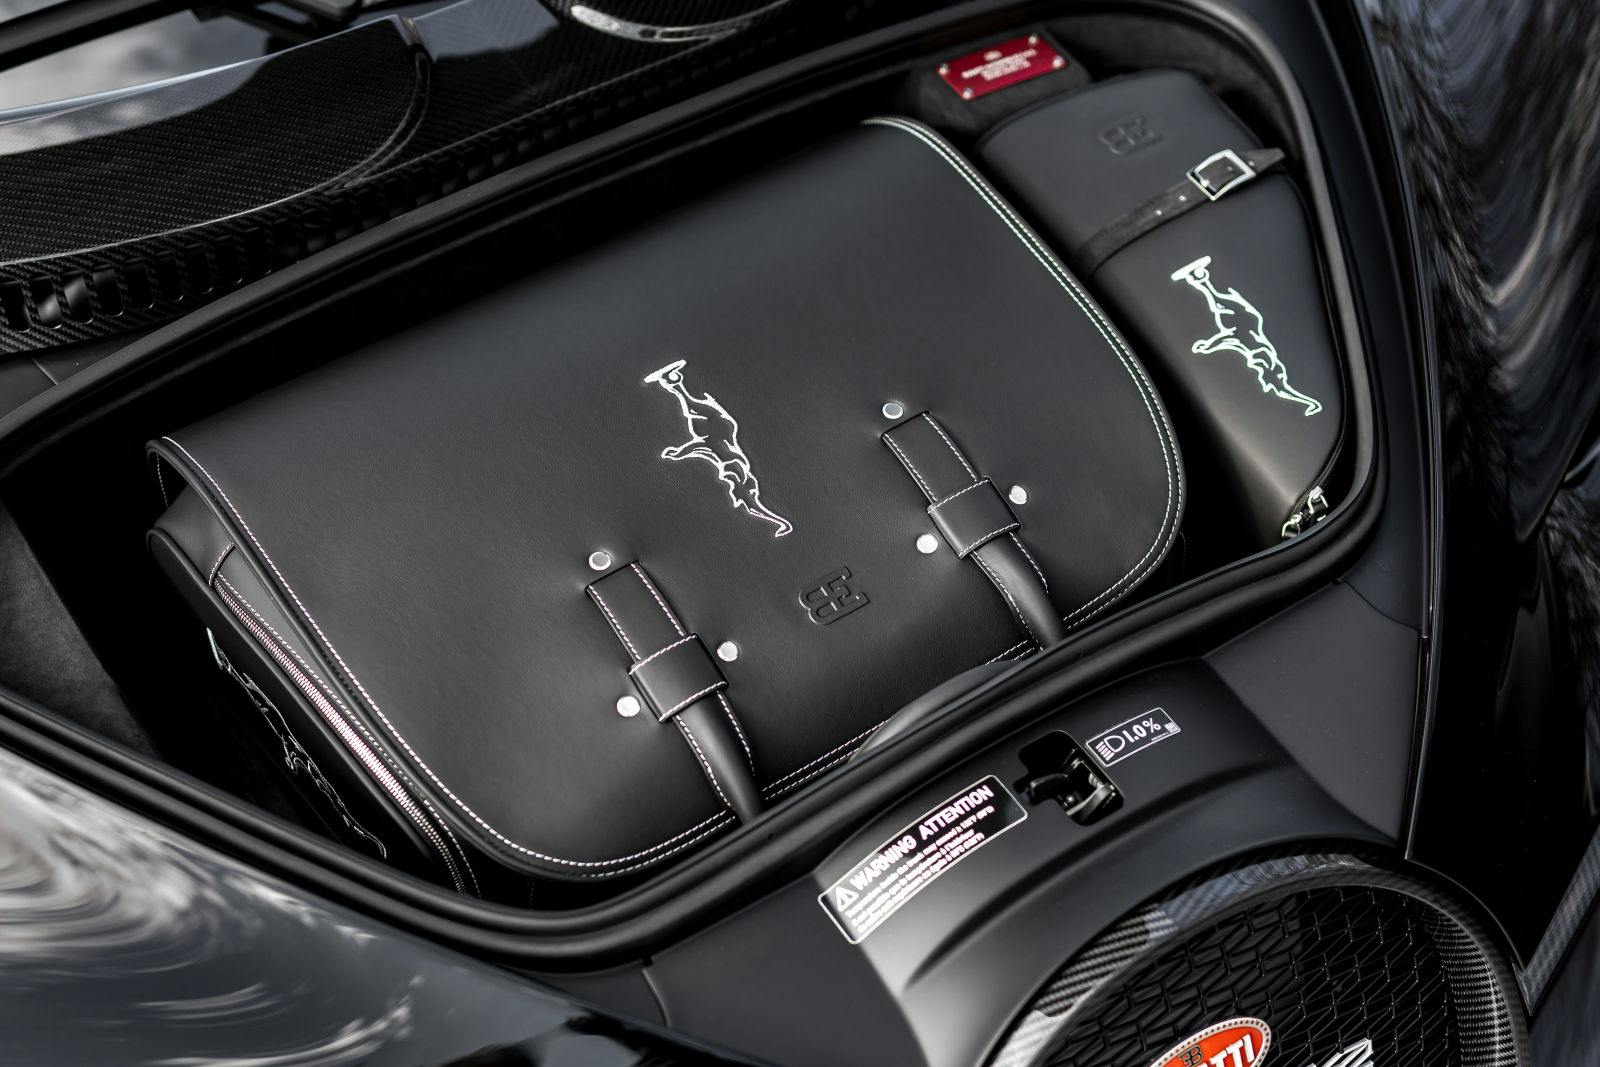 The three-piece luggage set stows perfectly in the Bugatti Chiron – the Weekender bag fits perfectly into the front trunk.